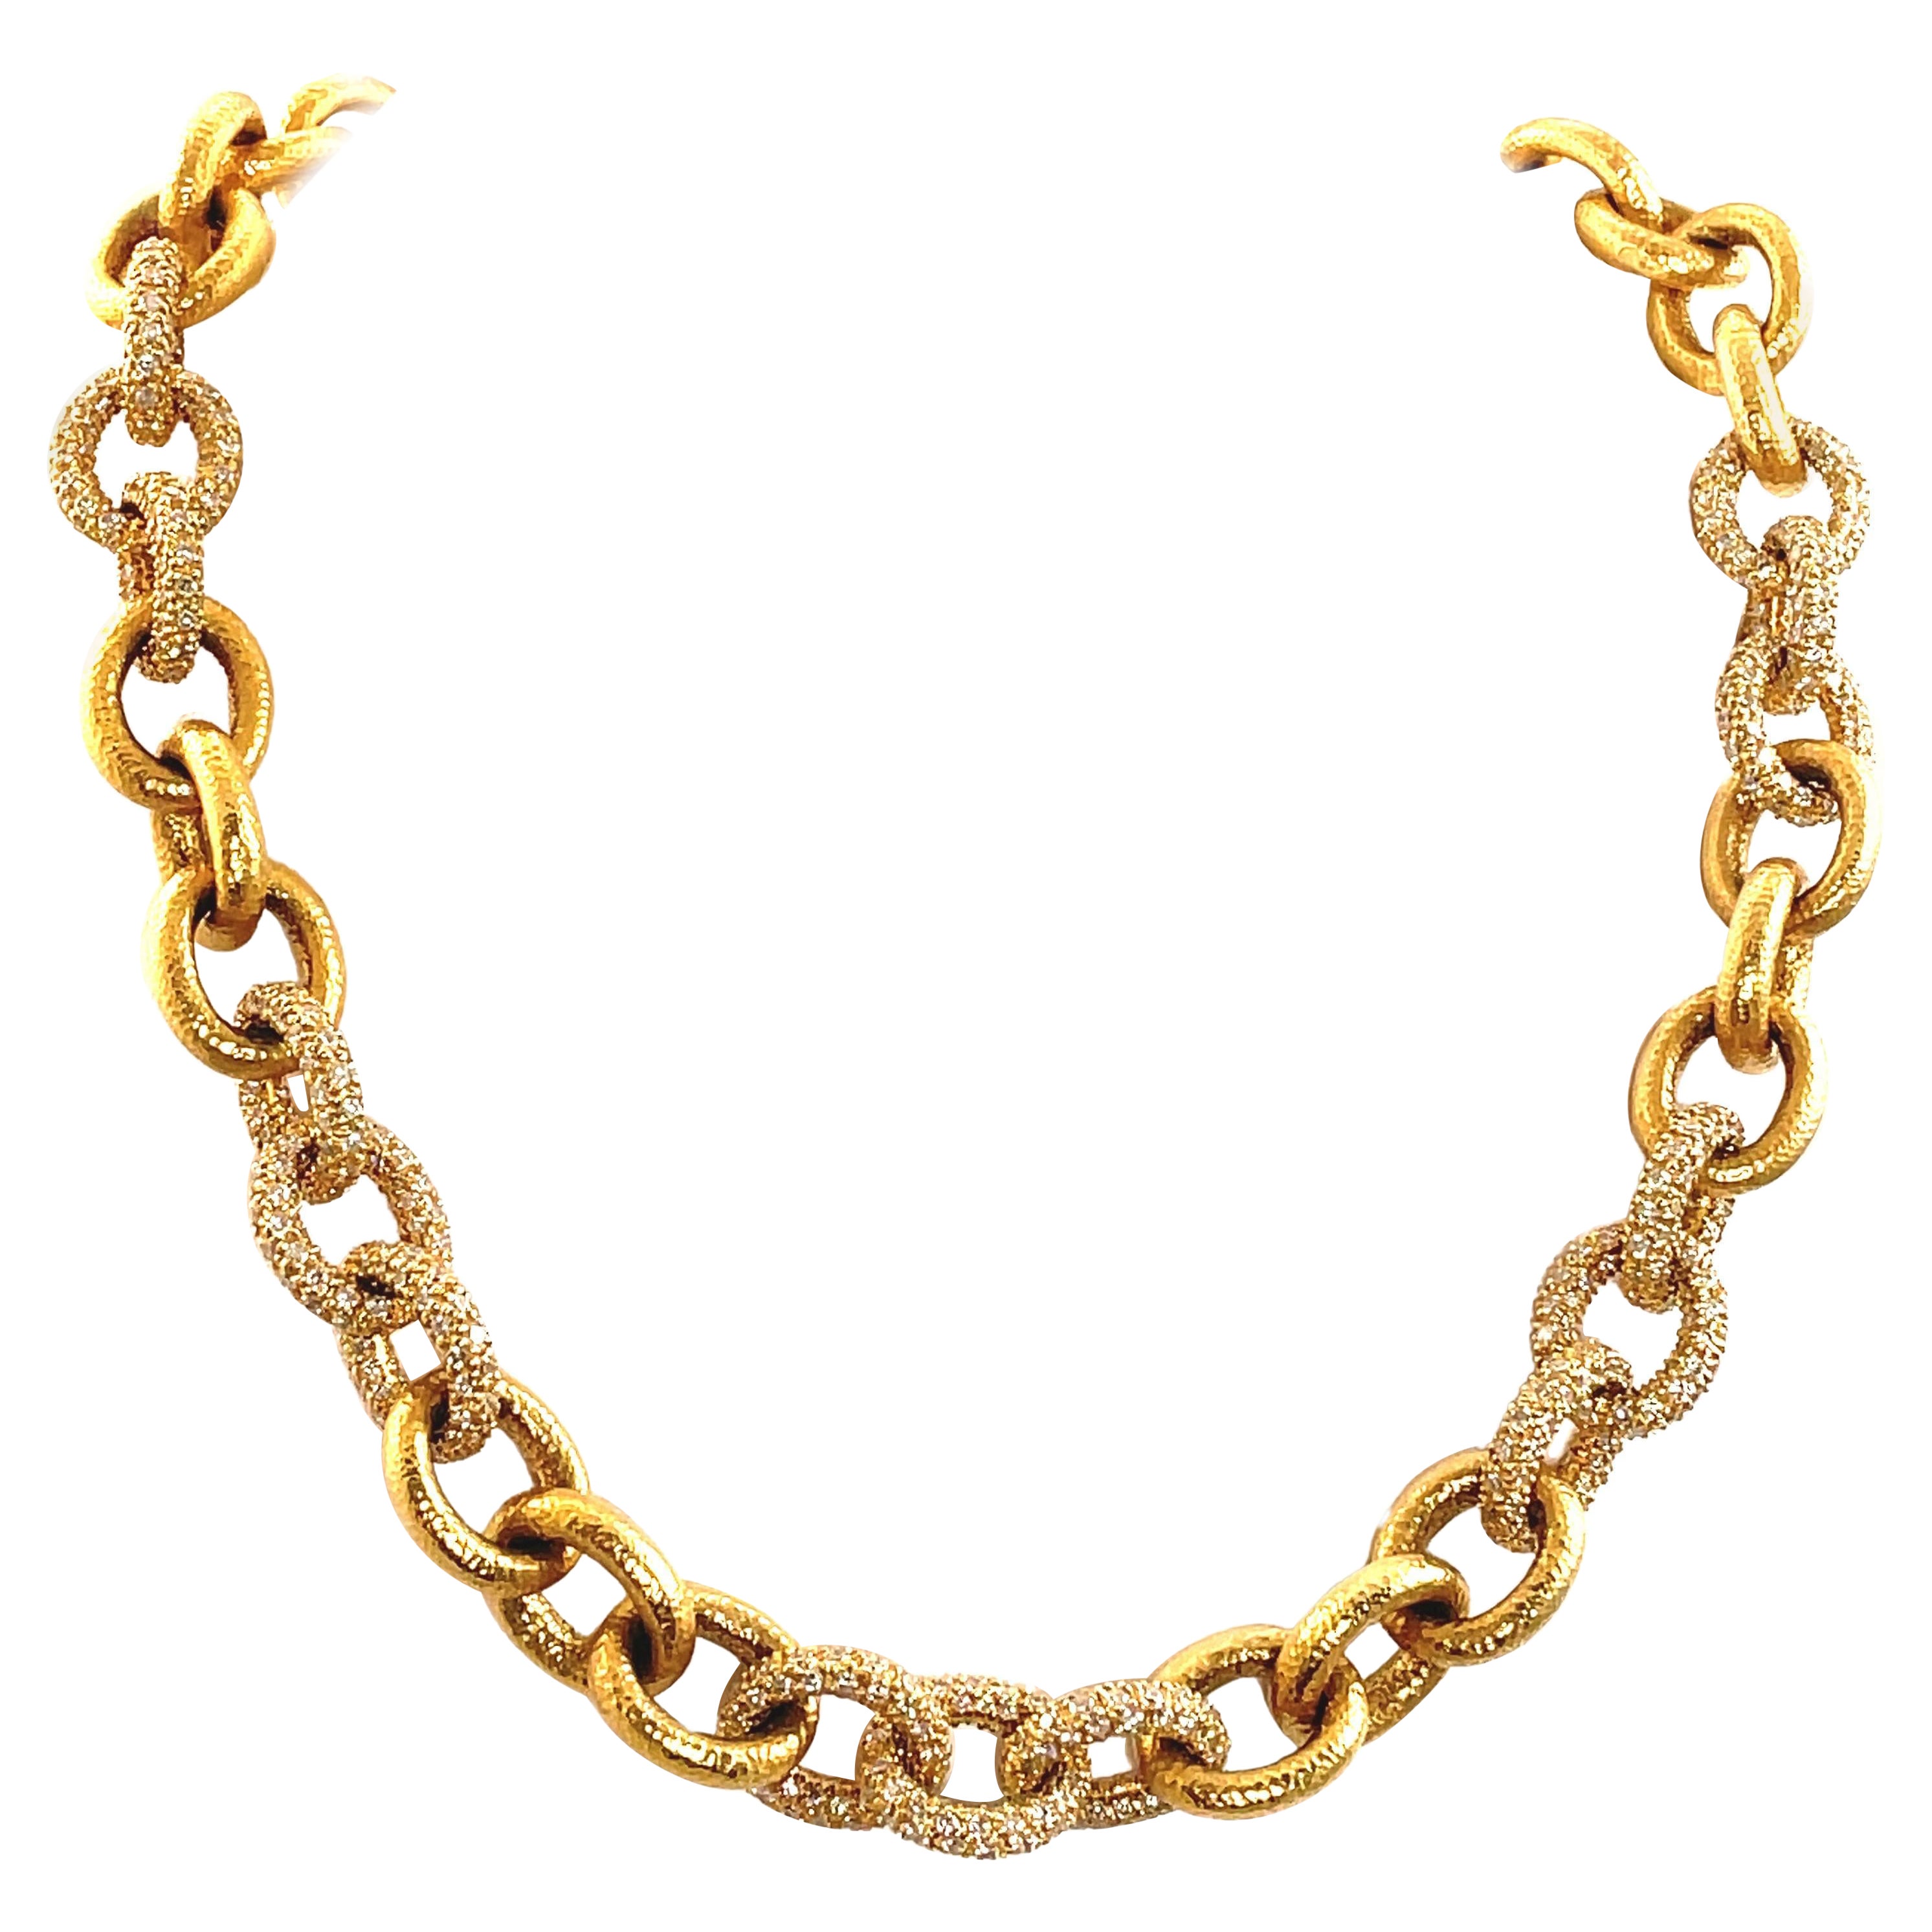 Rose Cut Yellow Diamond Chain Necklace 6 42ct Tw For Sale At 1stdibs